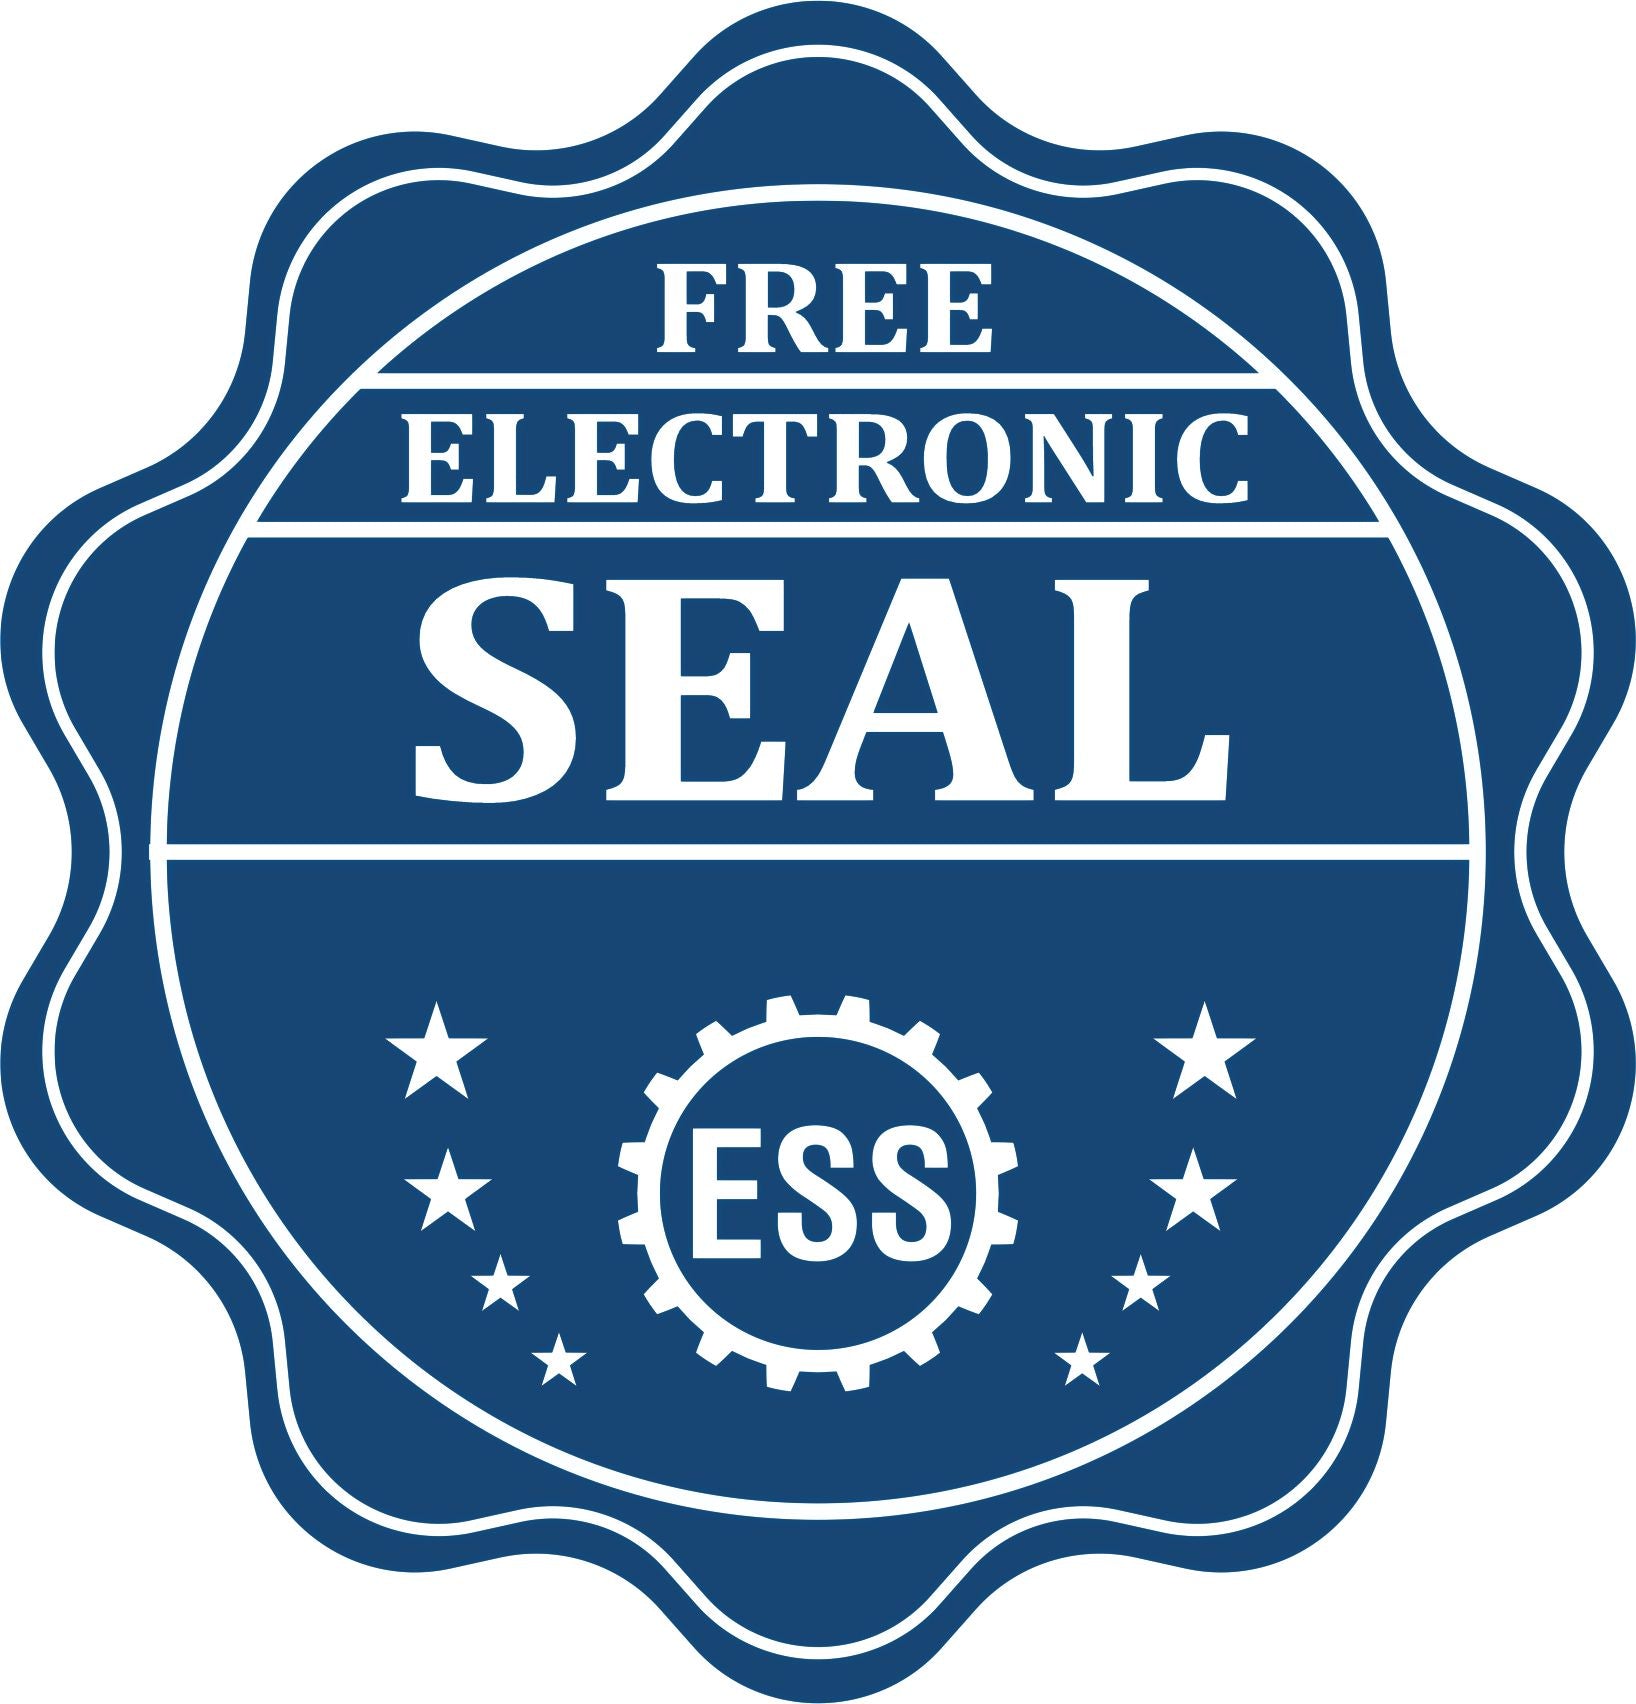 A badge showing a free electronic seal for the Slim Pre-Inked Mississippi Professional Geologist Seal Stamp with stars and the ESS gear on the emblem.